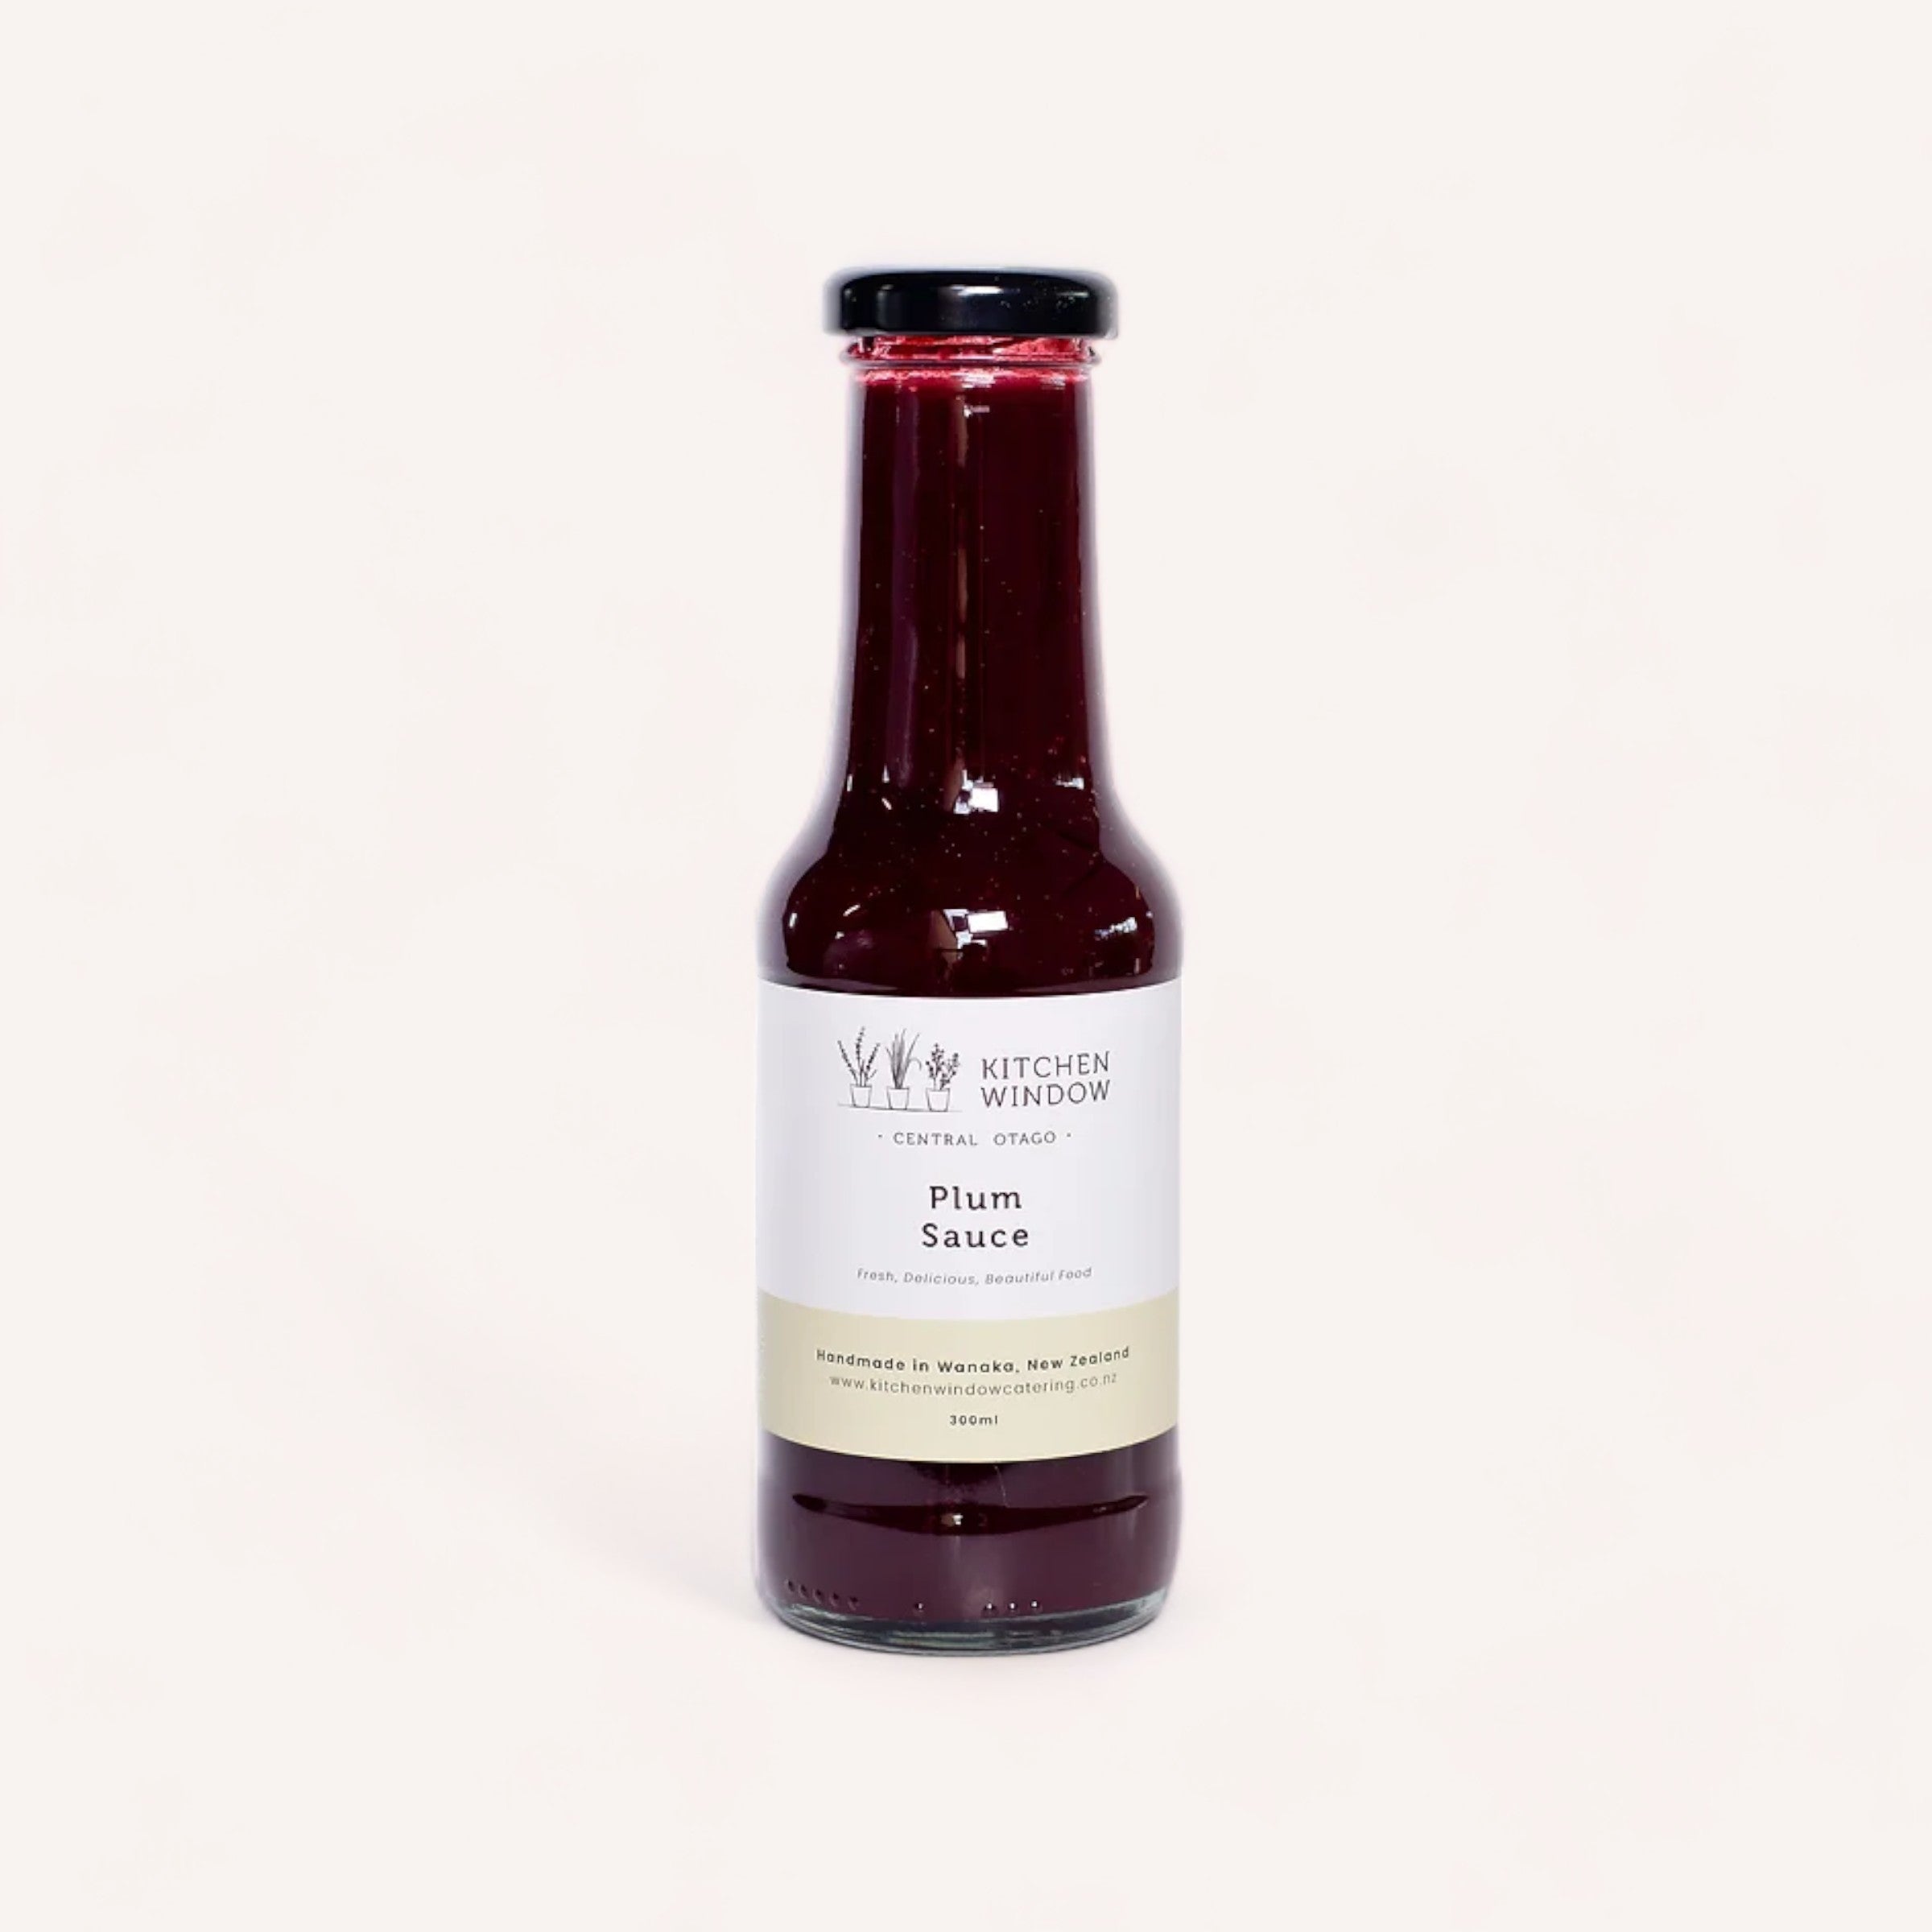 A bottle of award-winning Plum Sauce by Kitchen Window made with Black Doris plums from New Zealand on a solid light background, showcasing the product label with the brand "Kitchen Window" and flavor text indicating its.